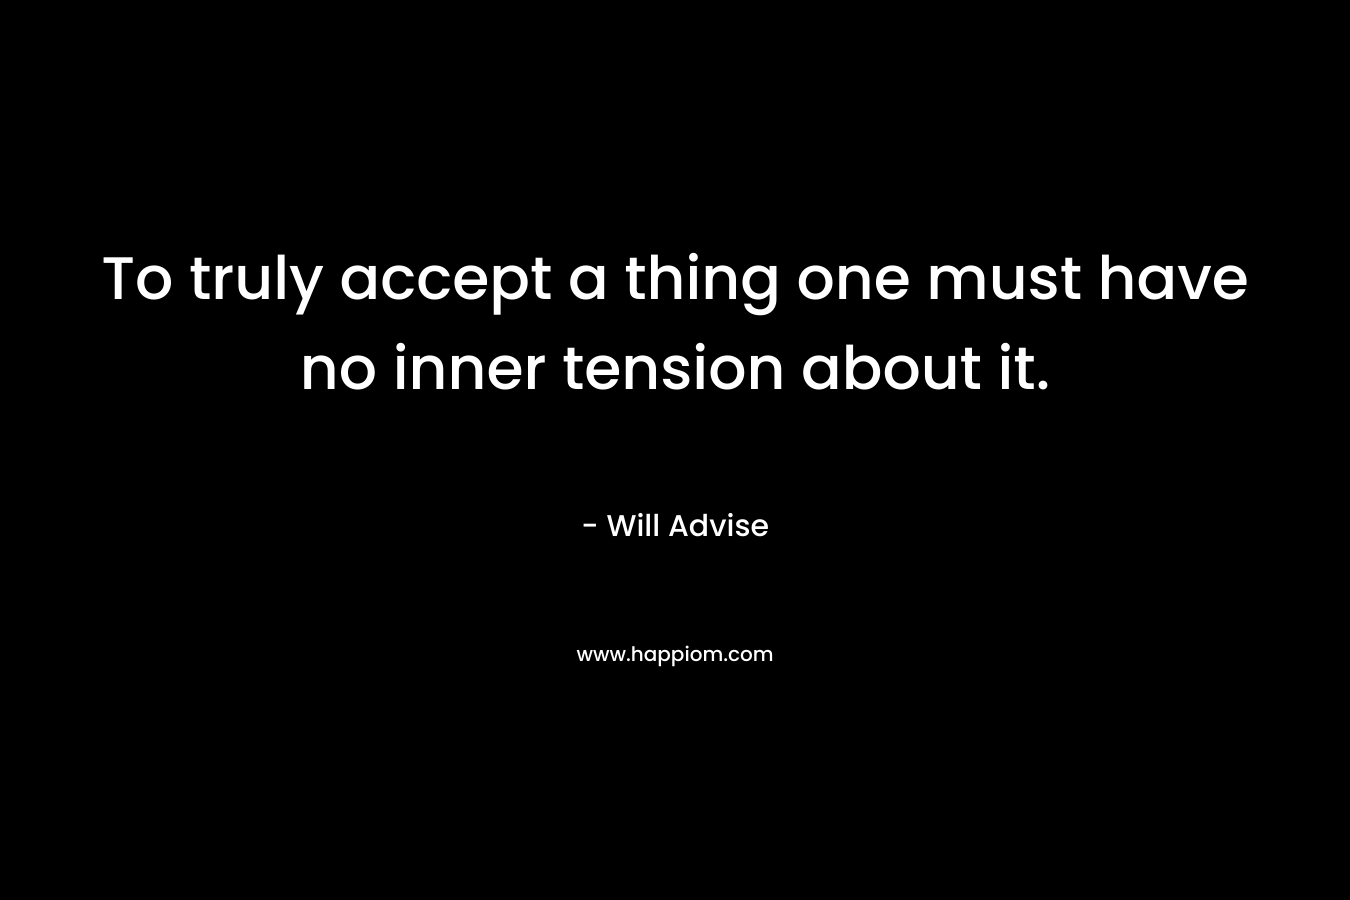 To truly accept a thing one must have no inner tension about it.